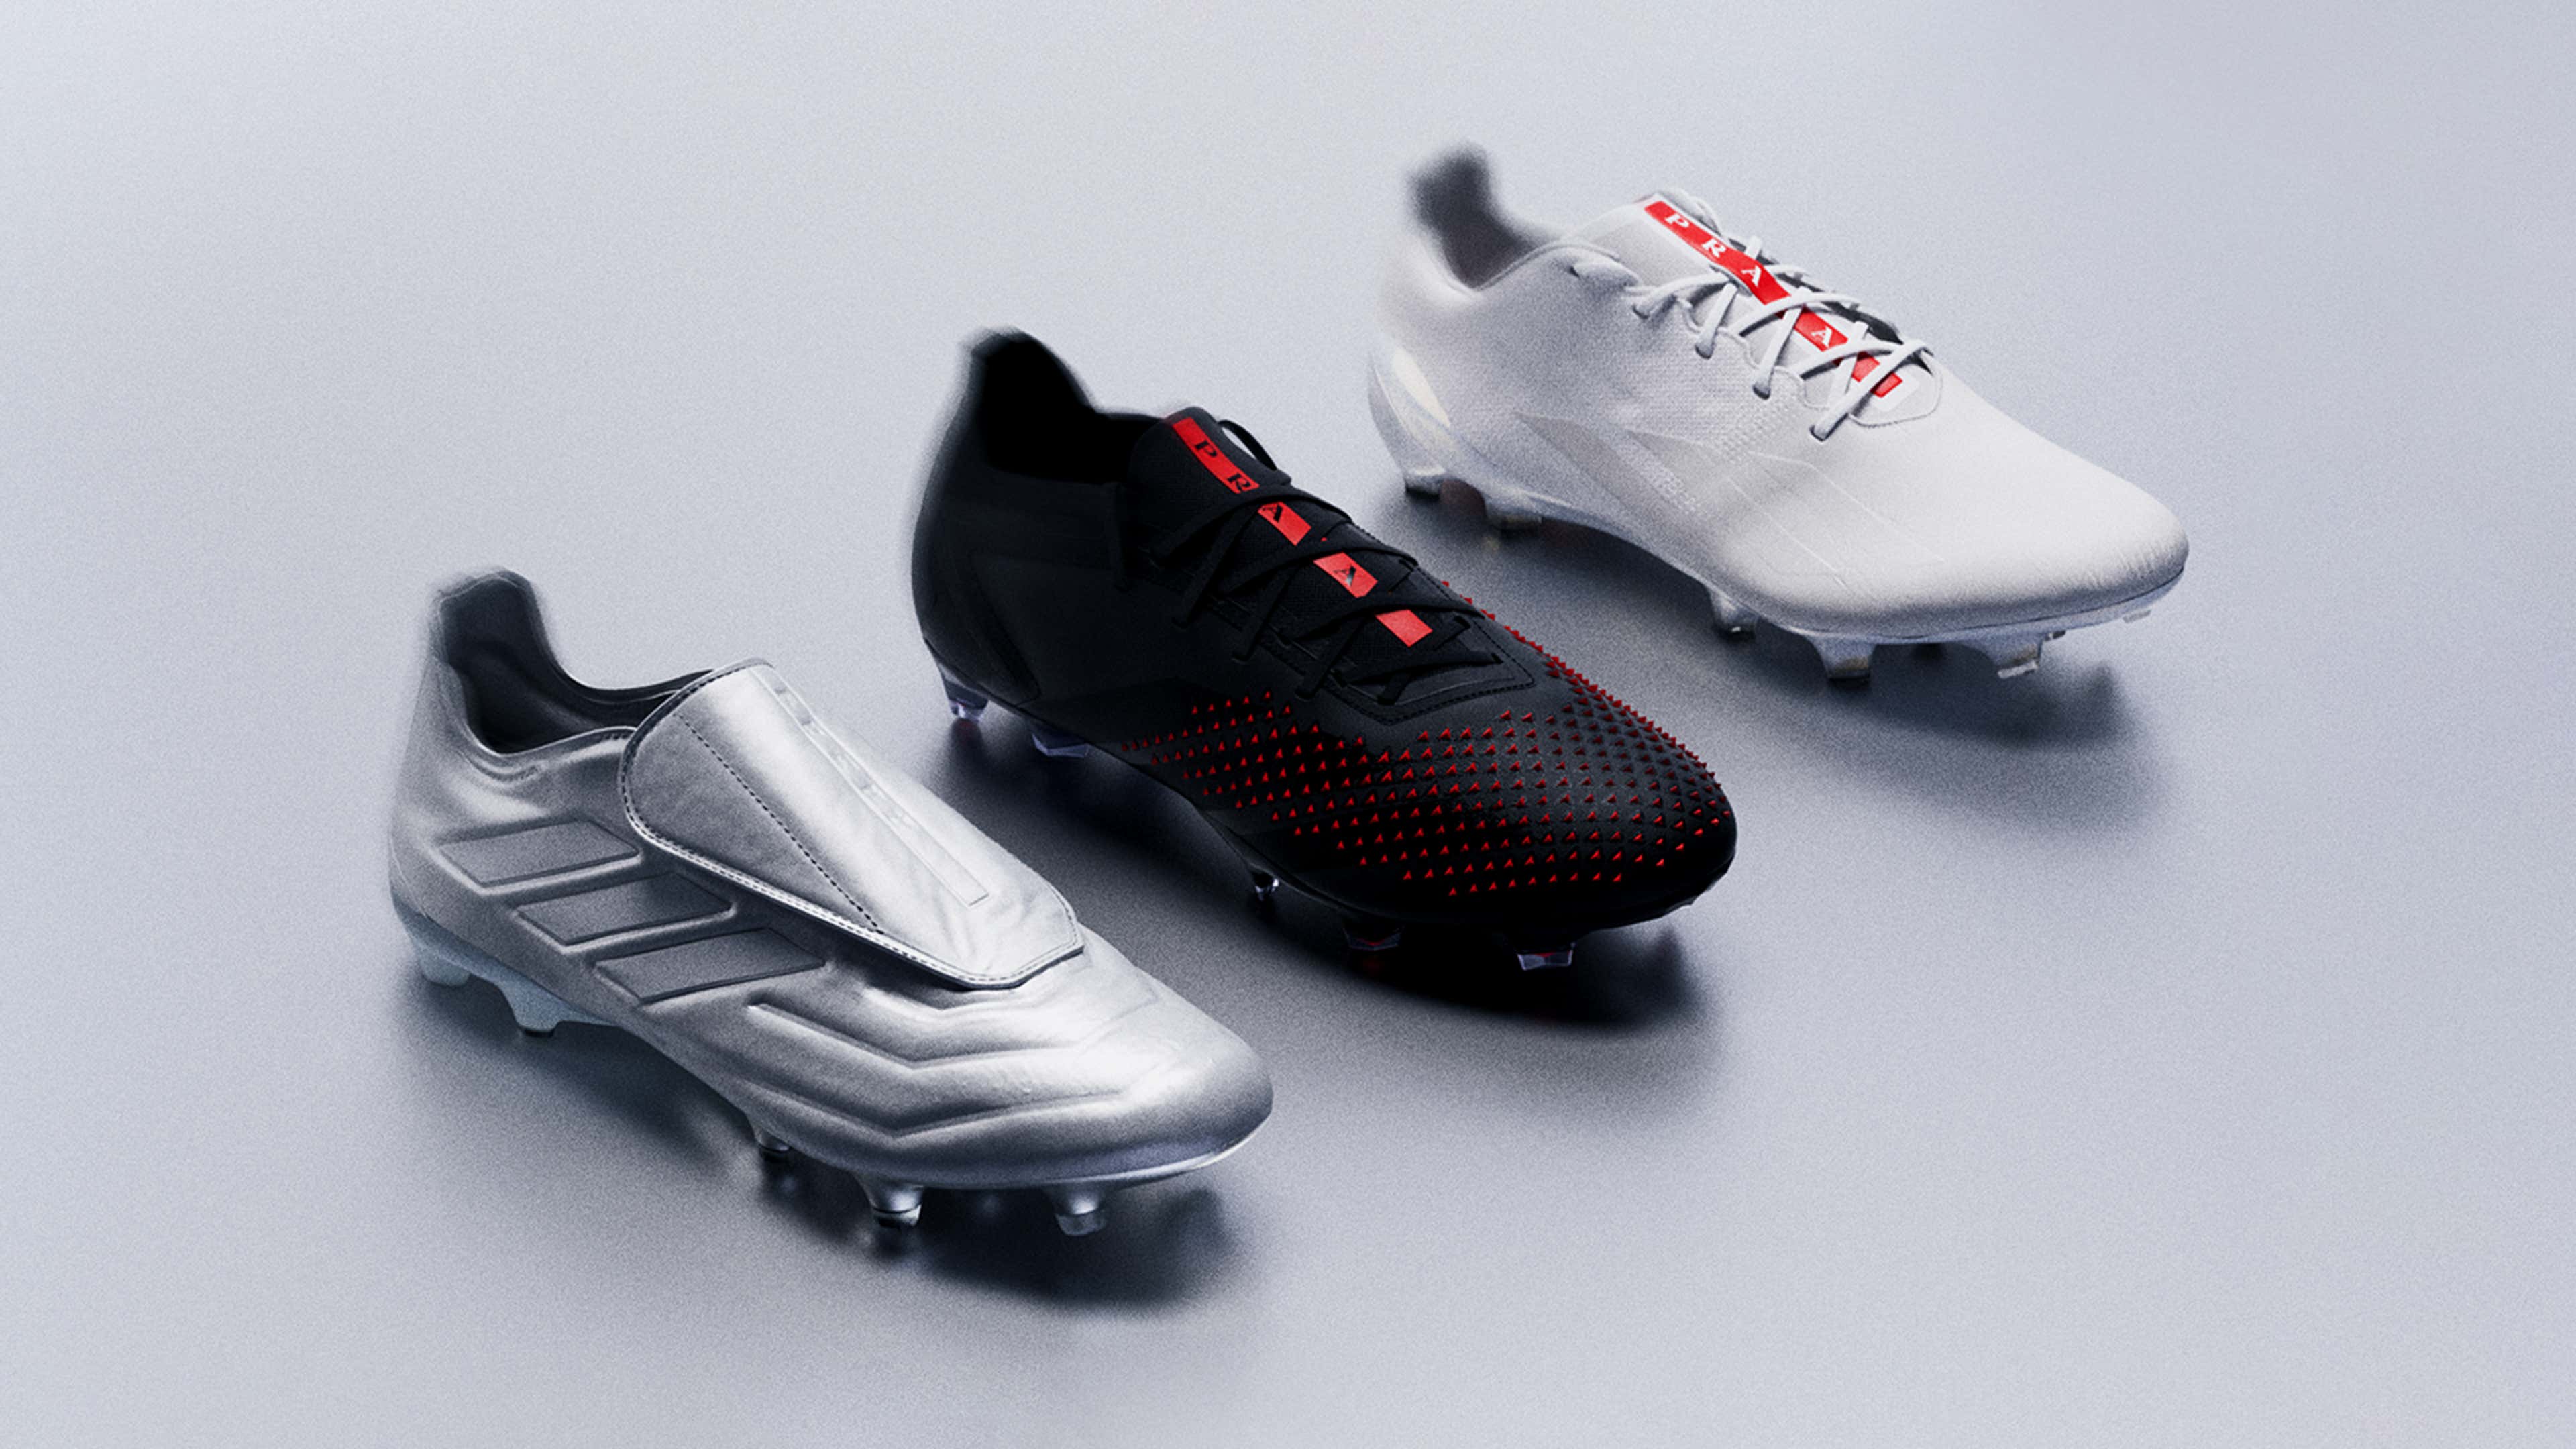 adidas and Prada drop limited-edition football boot collection